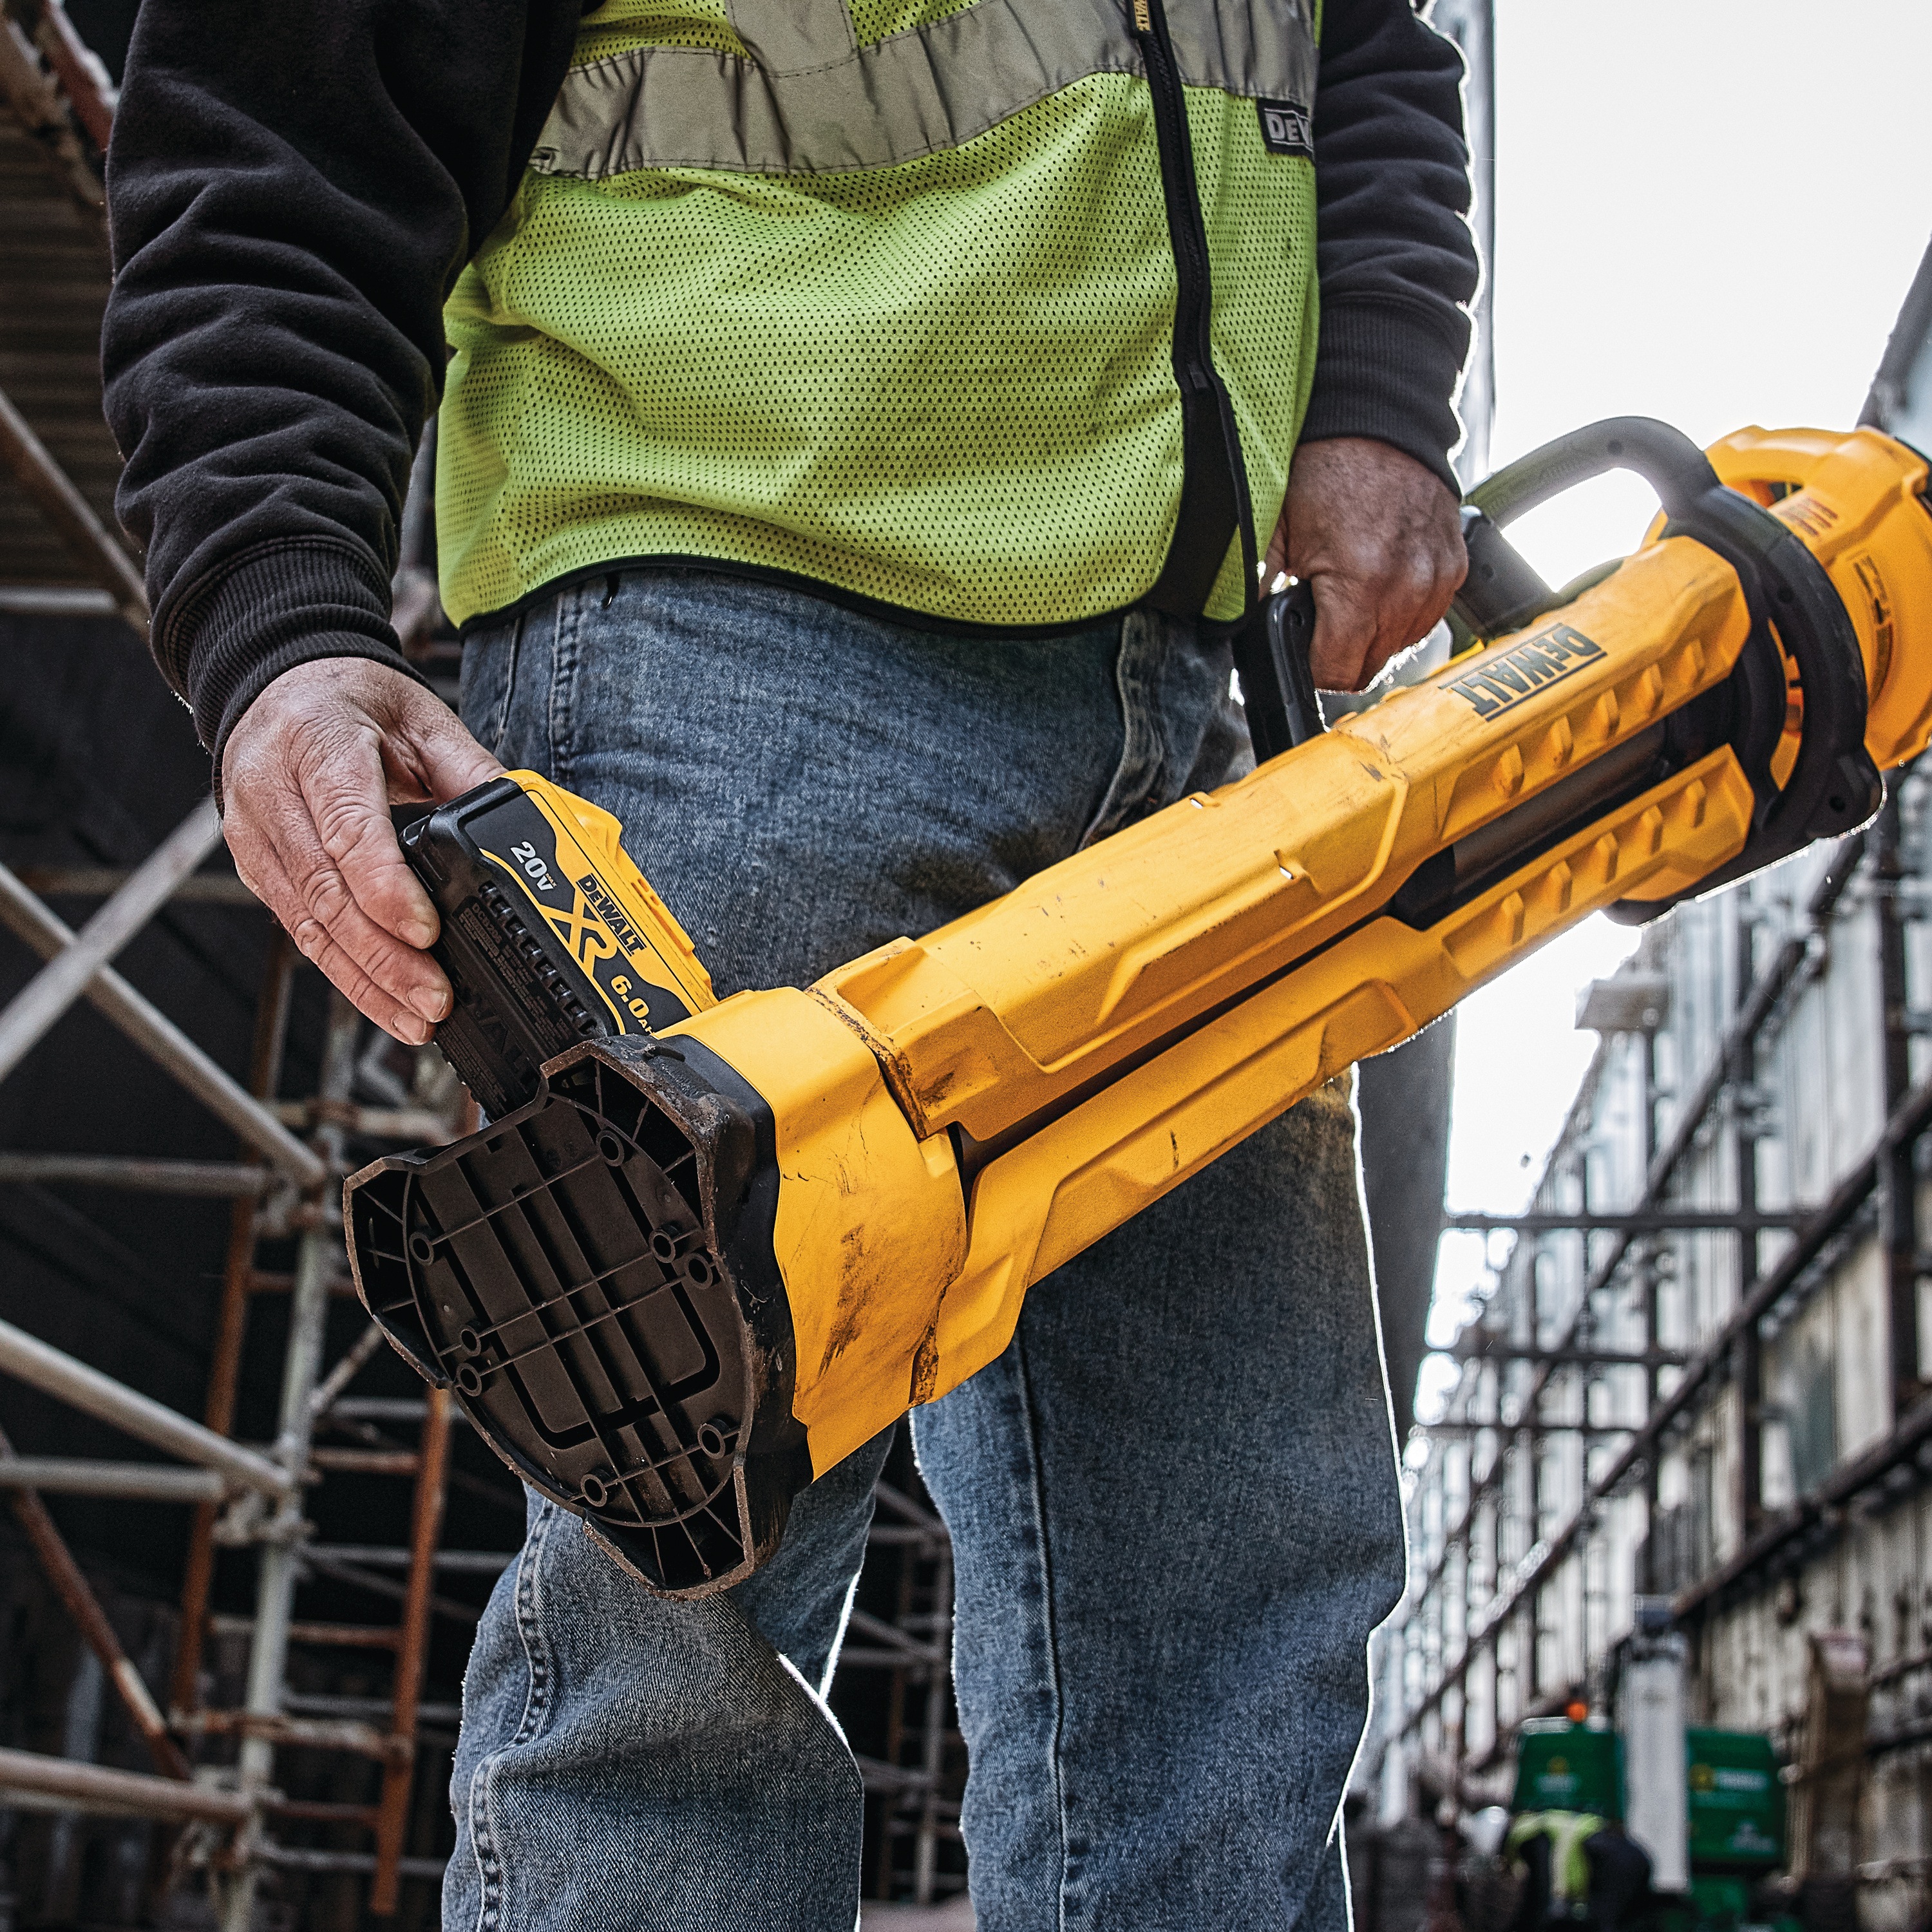 cordless tripod light being used by a construction worker in protective gear